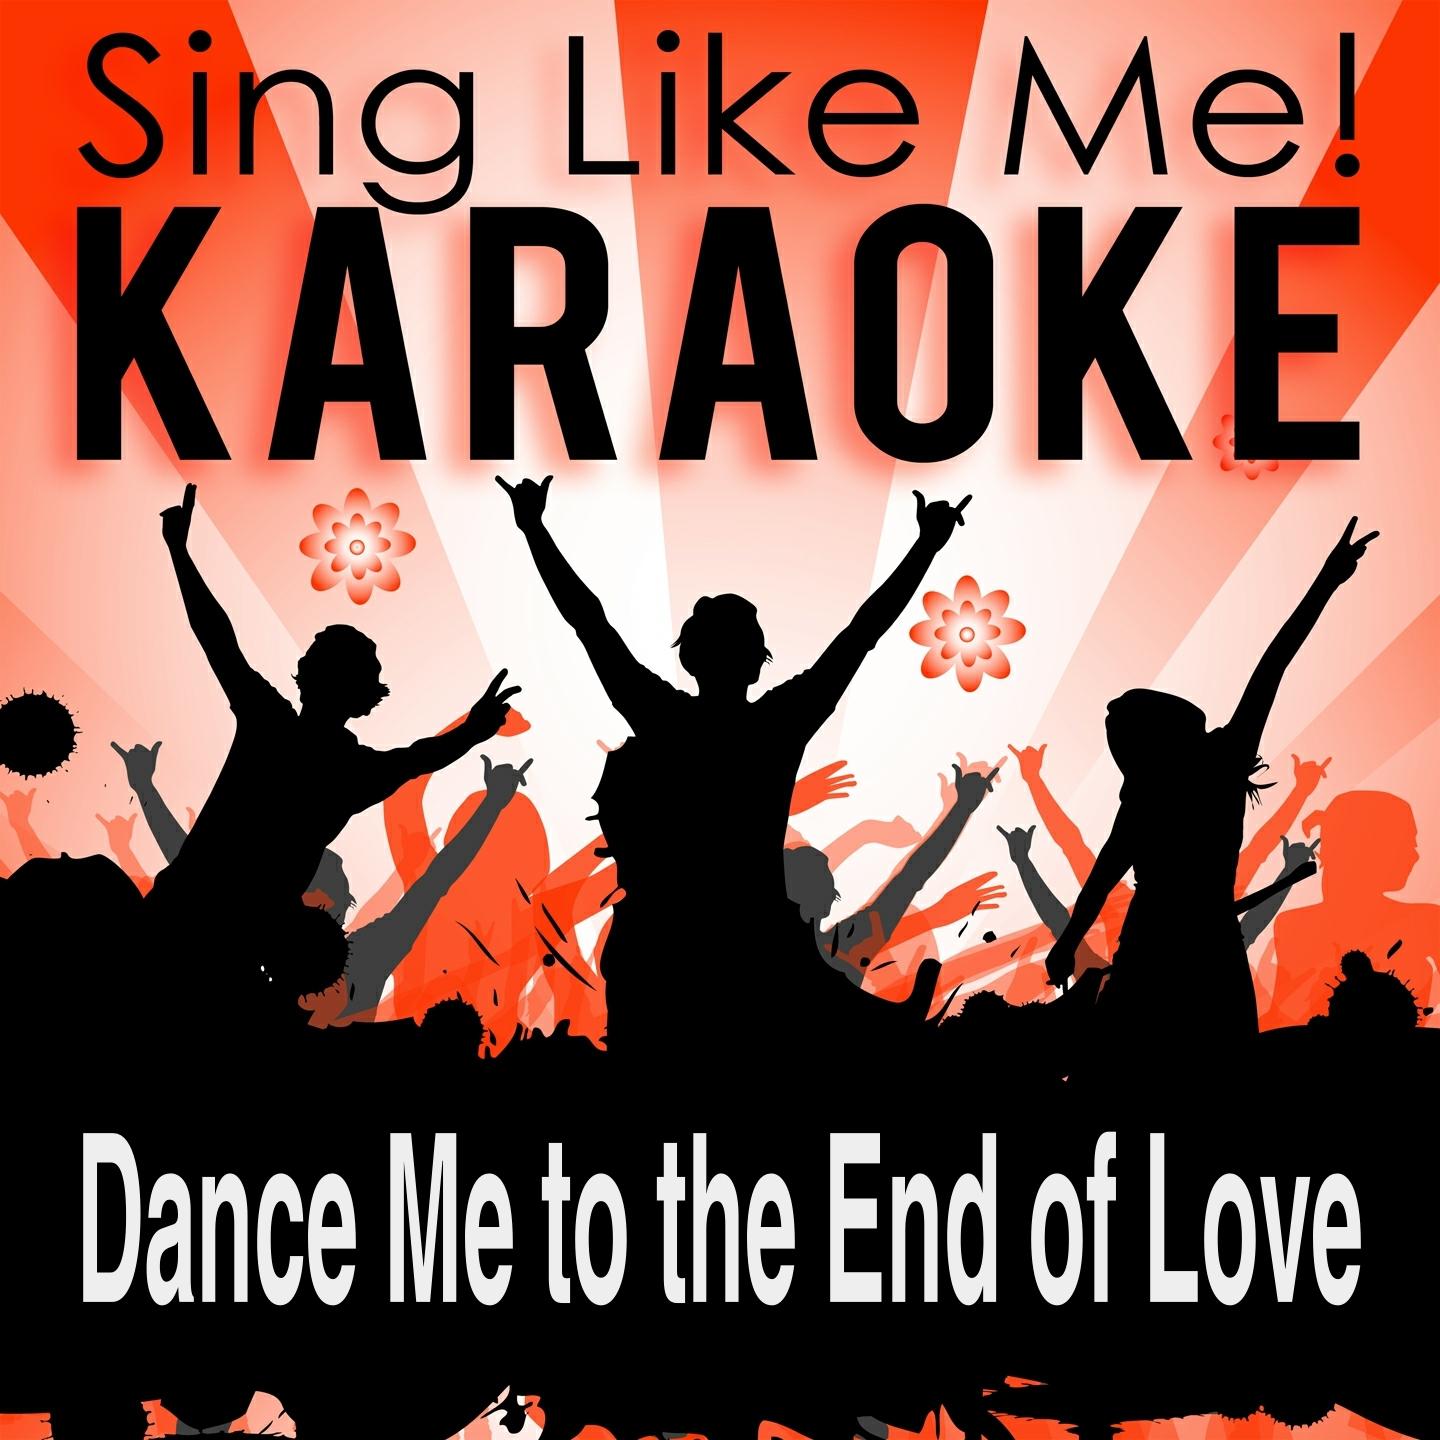 Dance Me to the End of Love (Karaoke Version) (Originally Performed By Leonard Cohen)